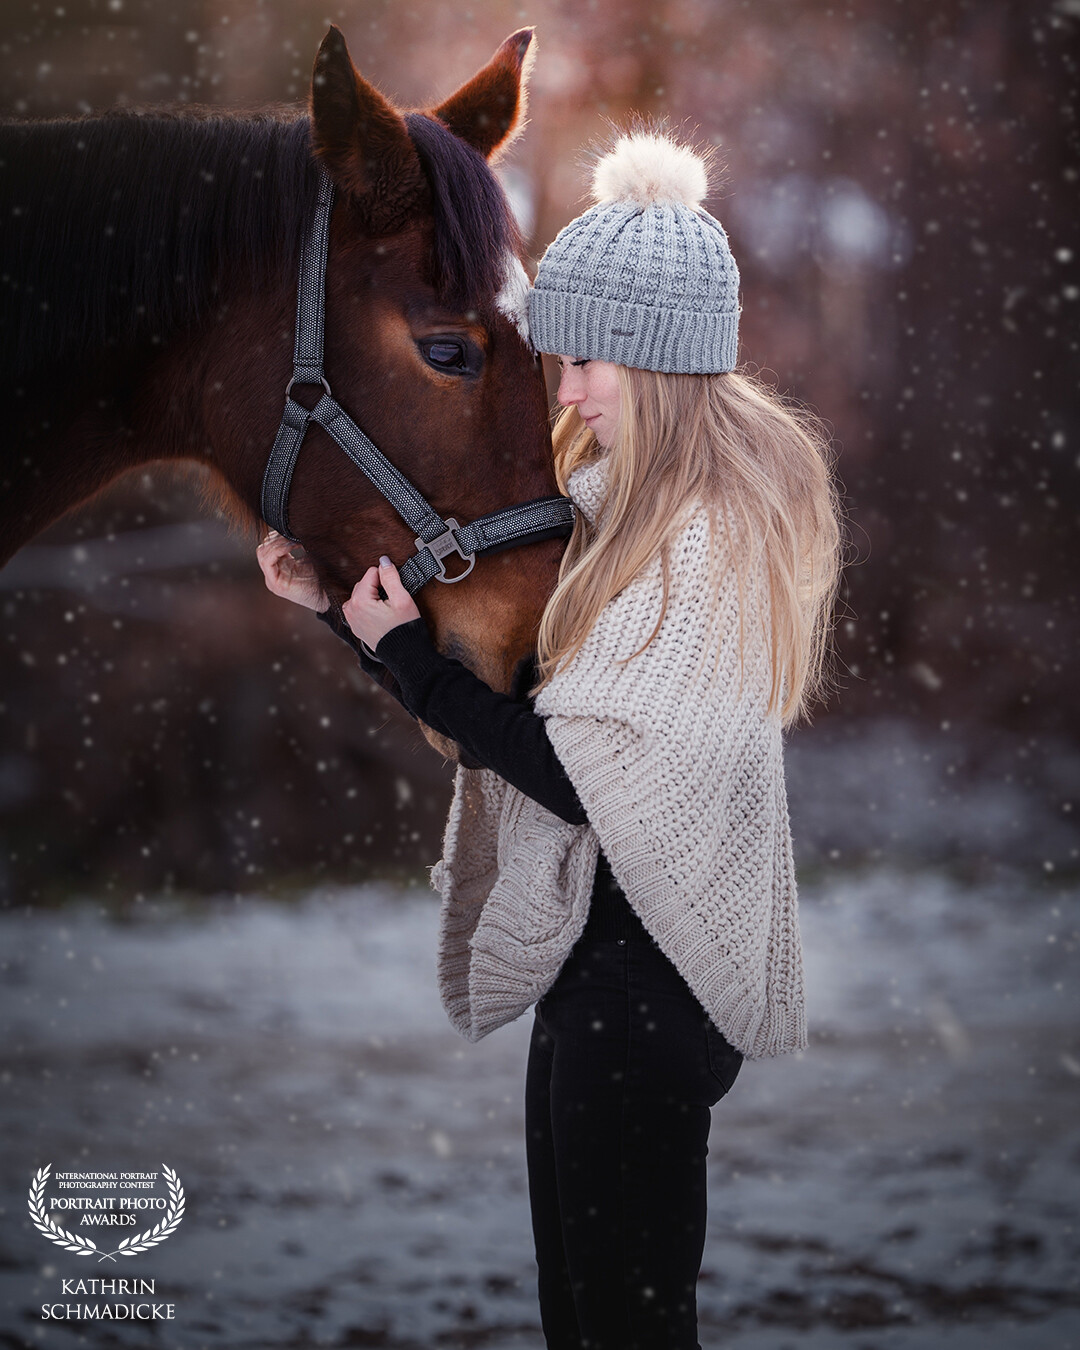 the intimate moment of this relationship between human and animal is a special kind of love, affection and honest loyalty! There is probably nothing more beautiful than capturing the moment when a human-animal relationship presents itself so beautifully